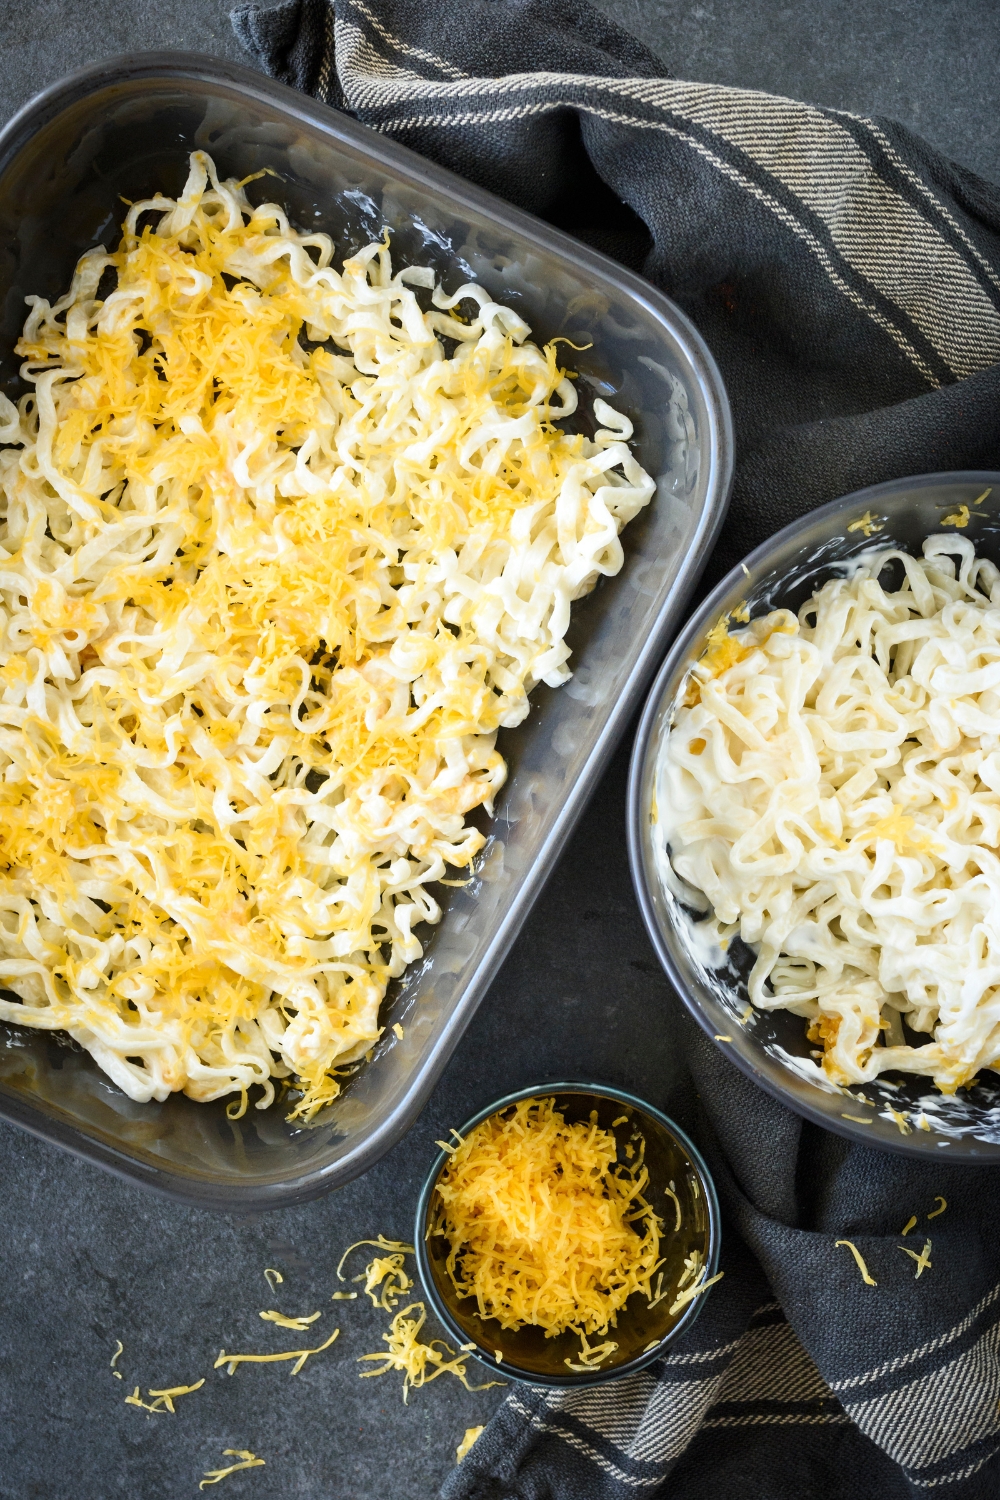 A baking dish filled with a layer of cooked noodles and shredded cheese. Next to the baking dish is a bowl of noodles in cream sauce and a bowl of shredded cheese.